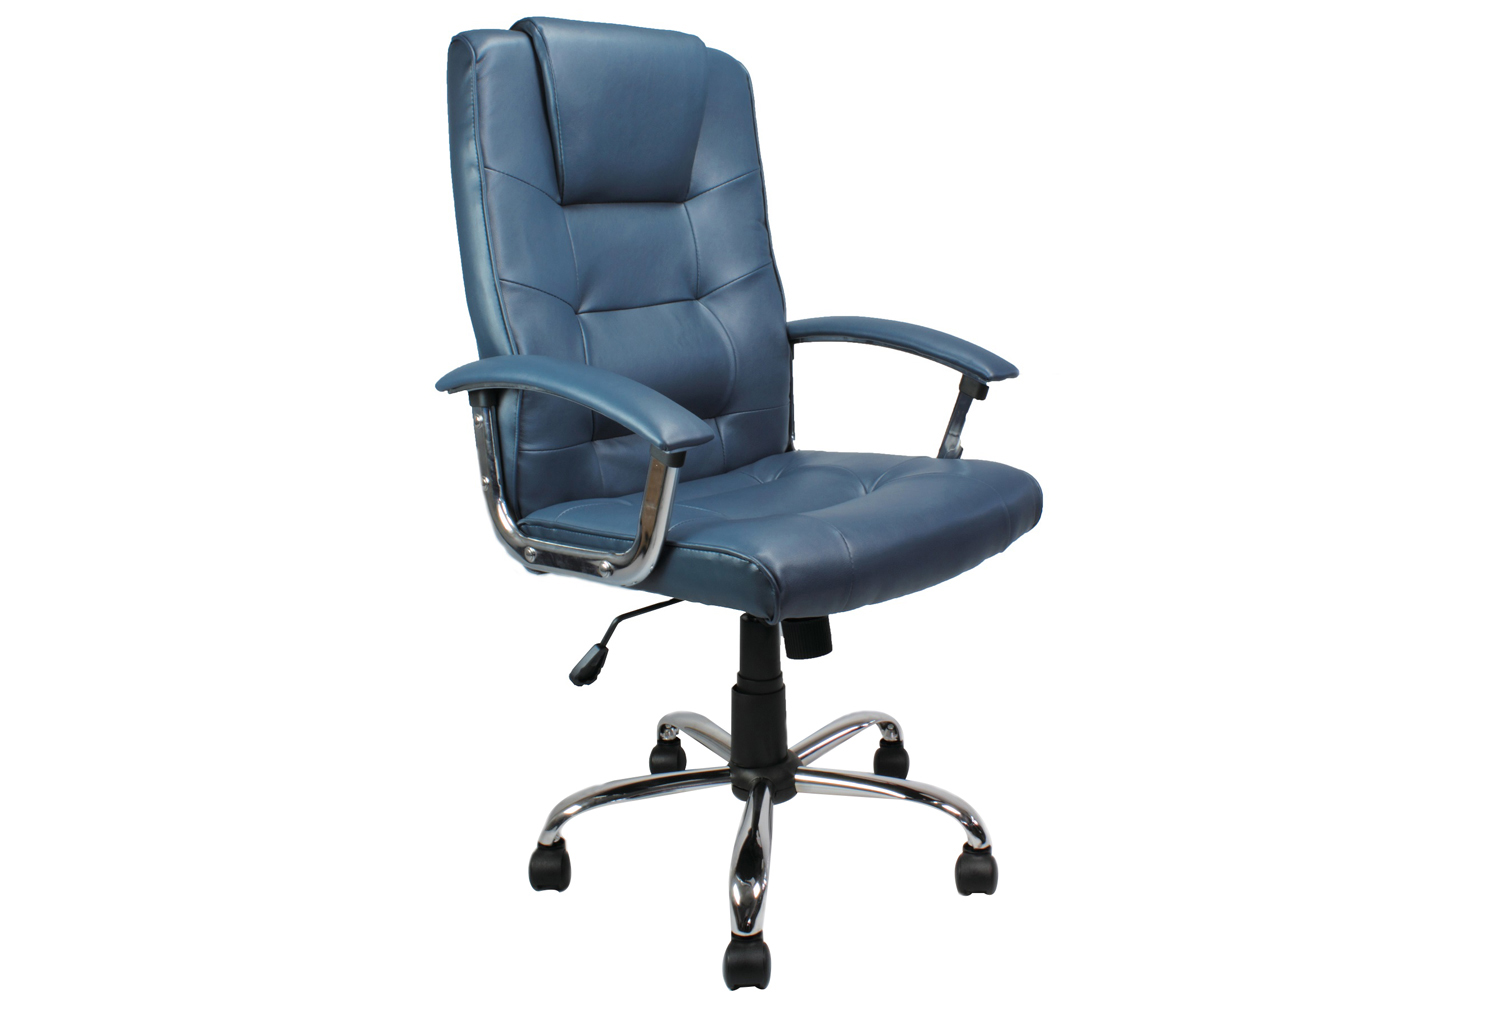 Skye High Back Blue Leather Faced Executive Office Chair, Blue, Express Delivery